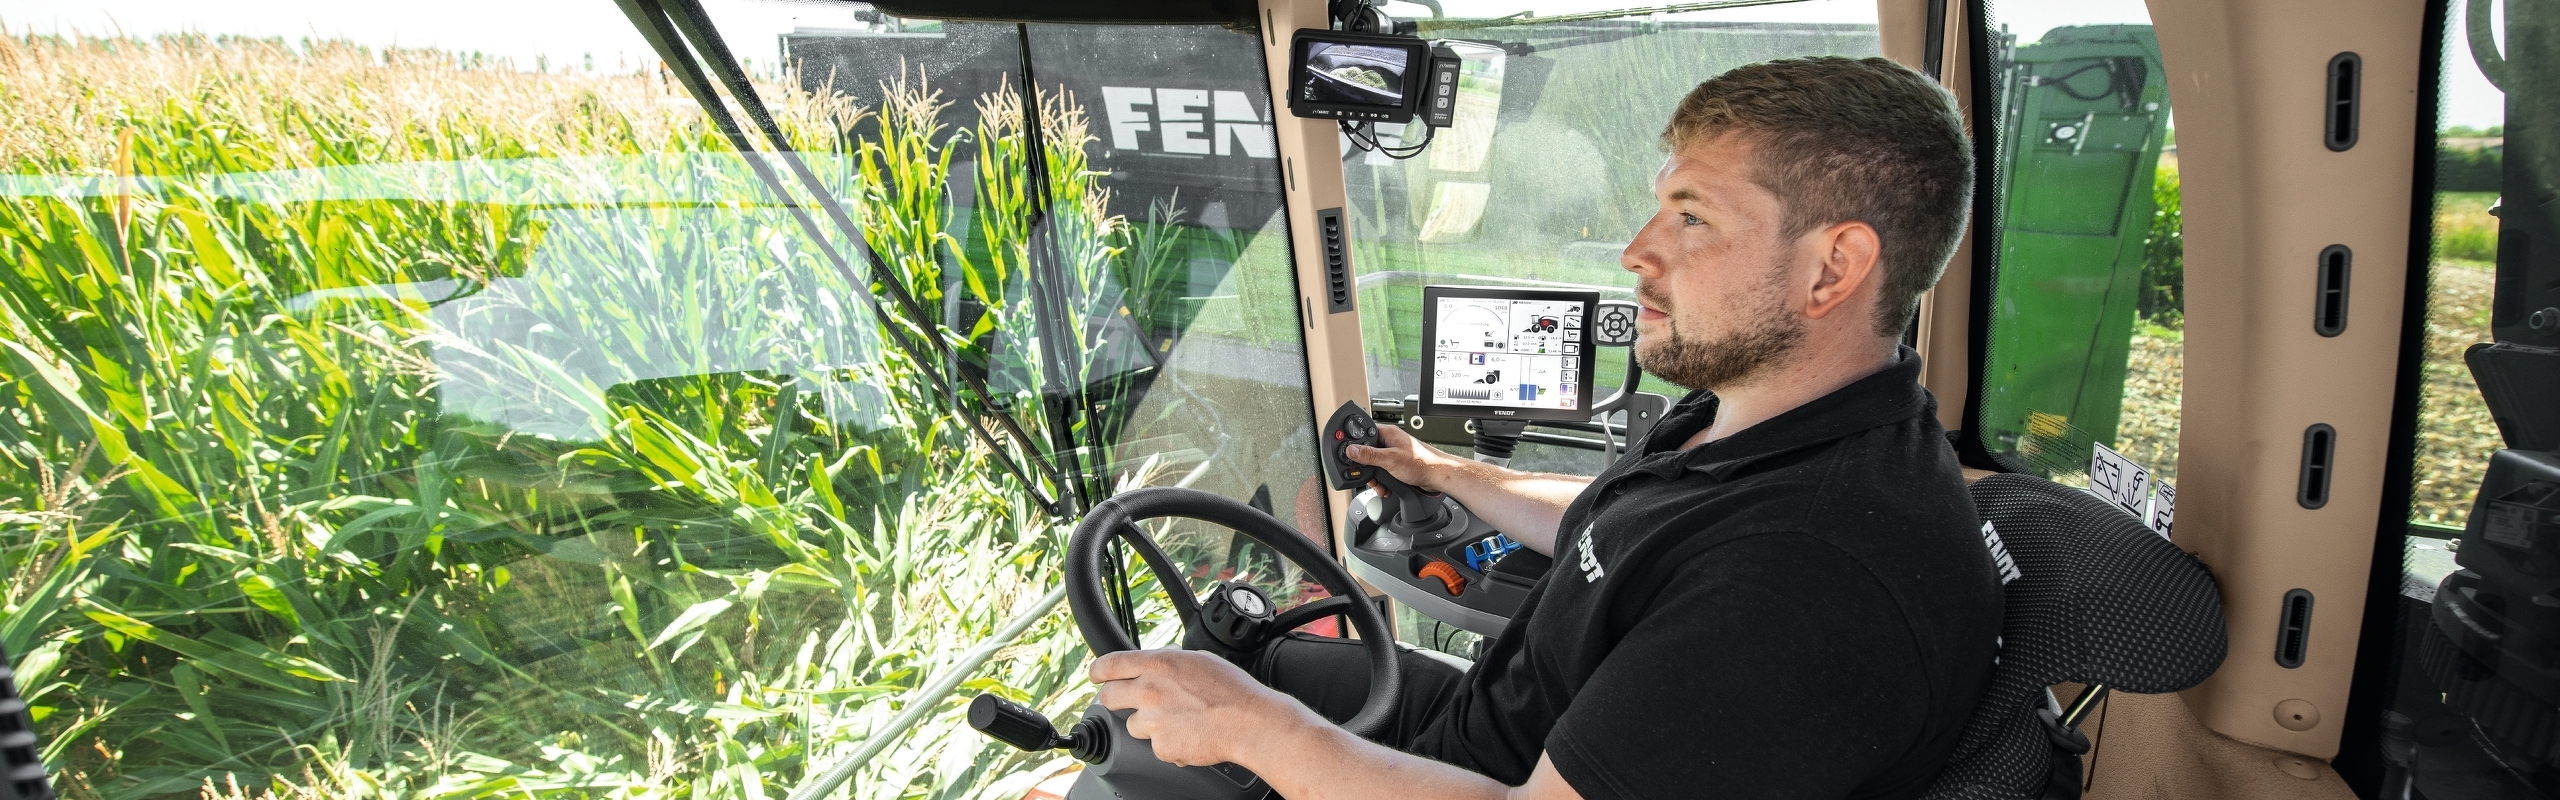 Farmer sits in the cab of the Fendt Katana in a maize field